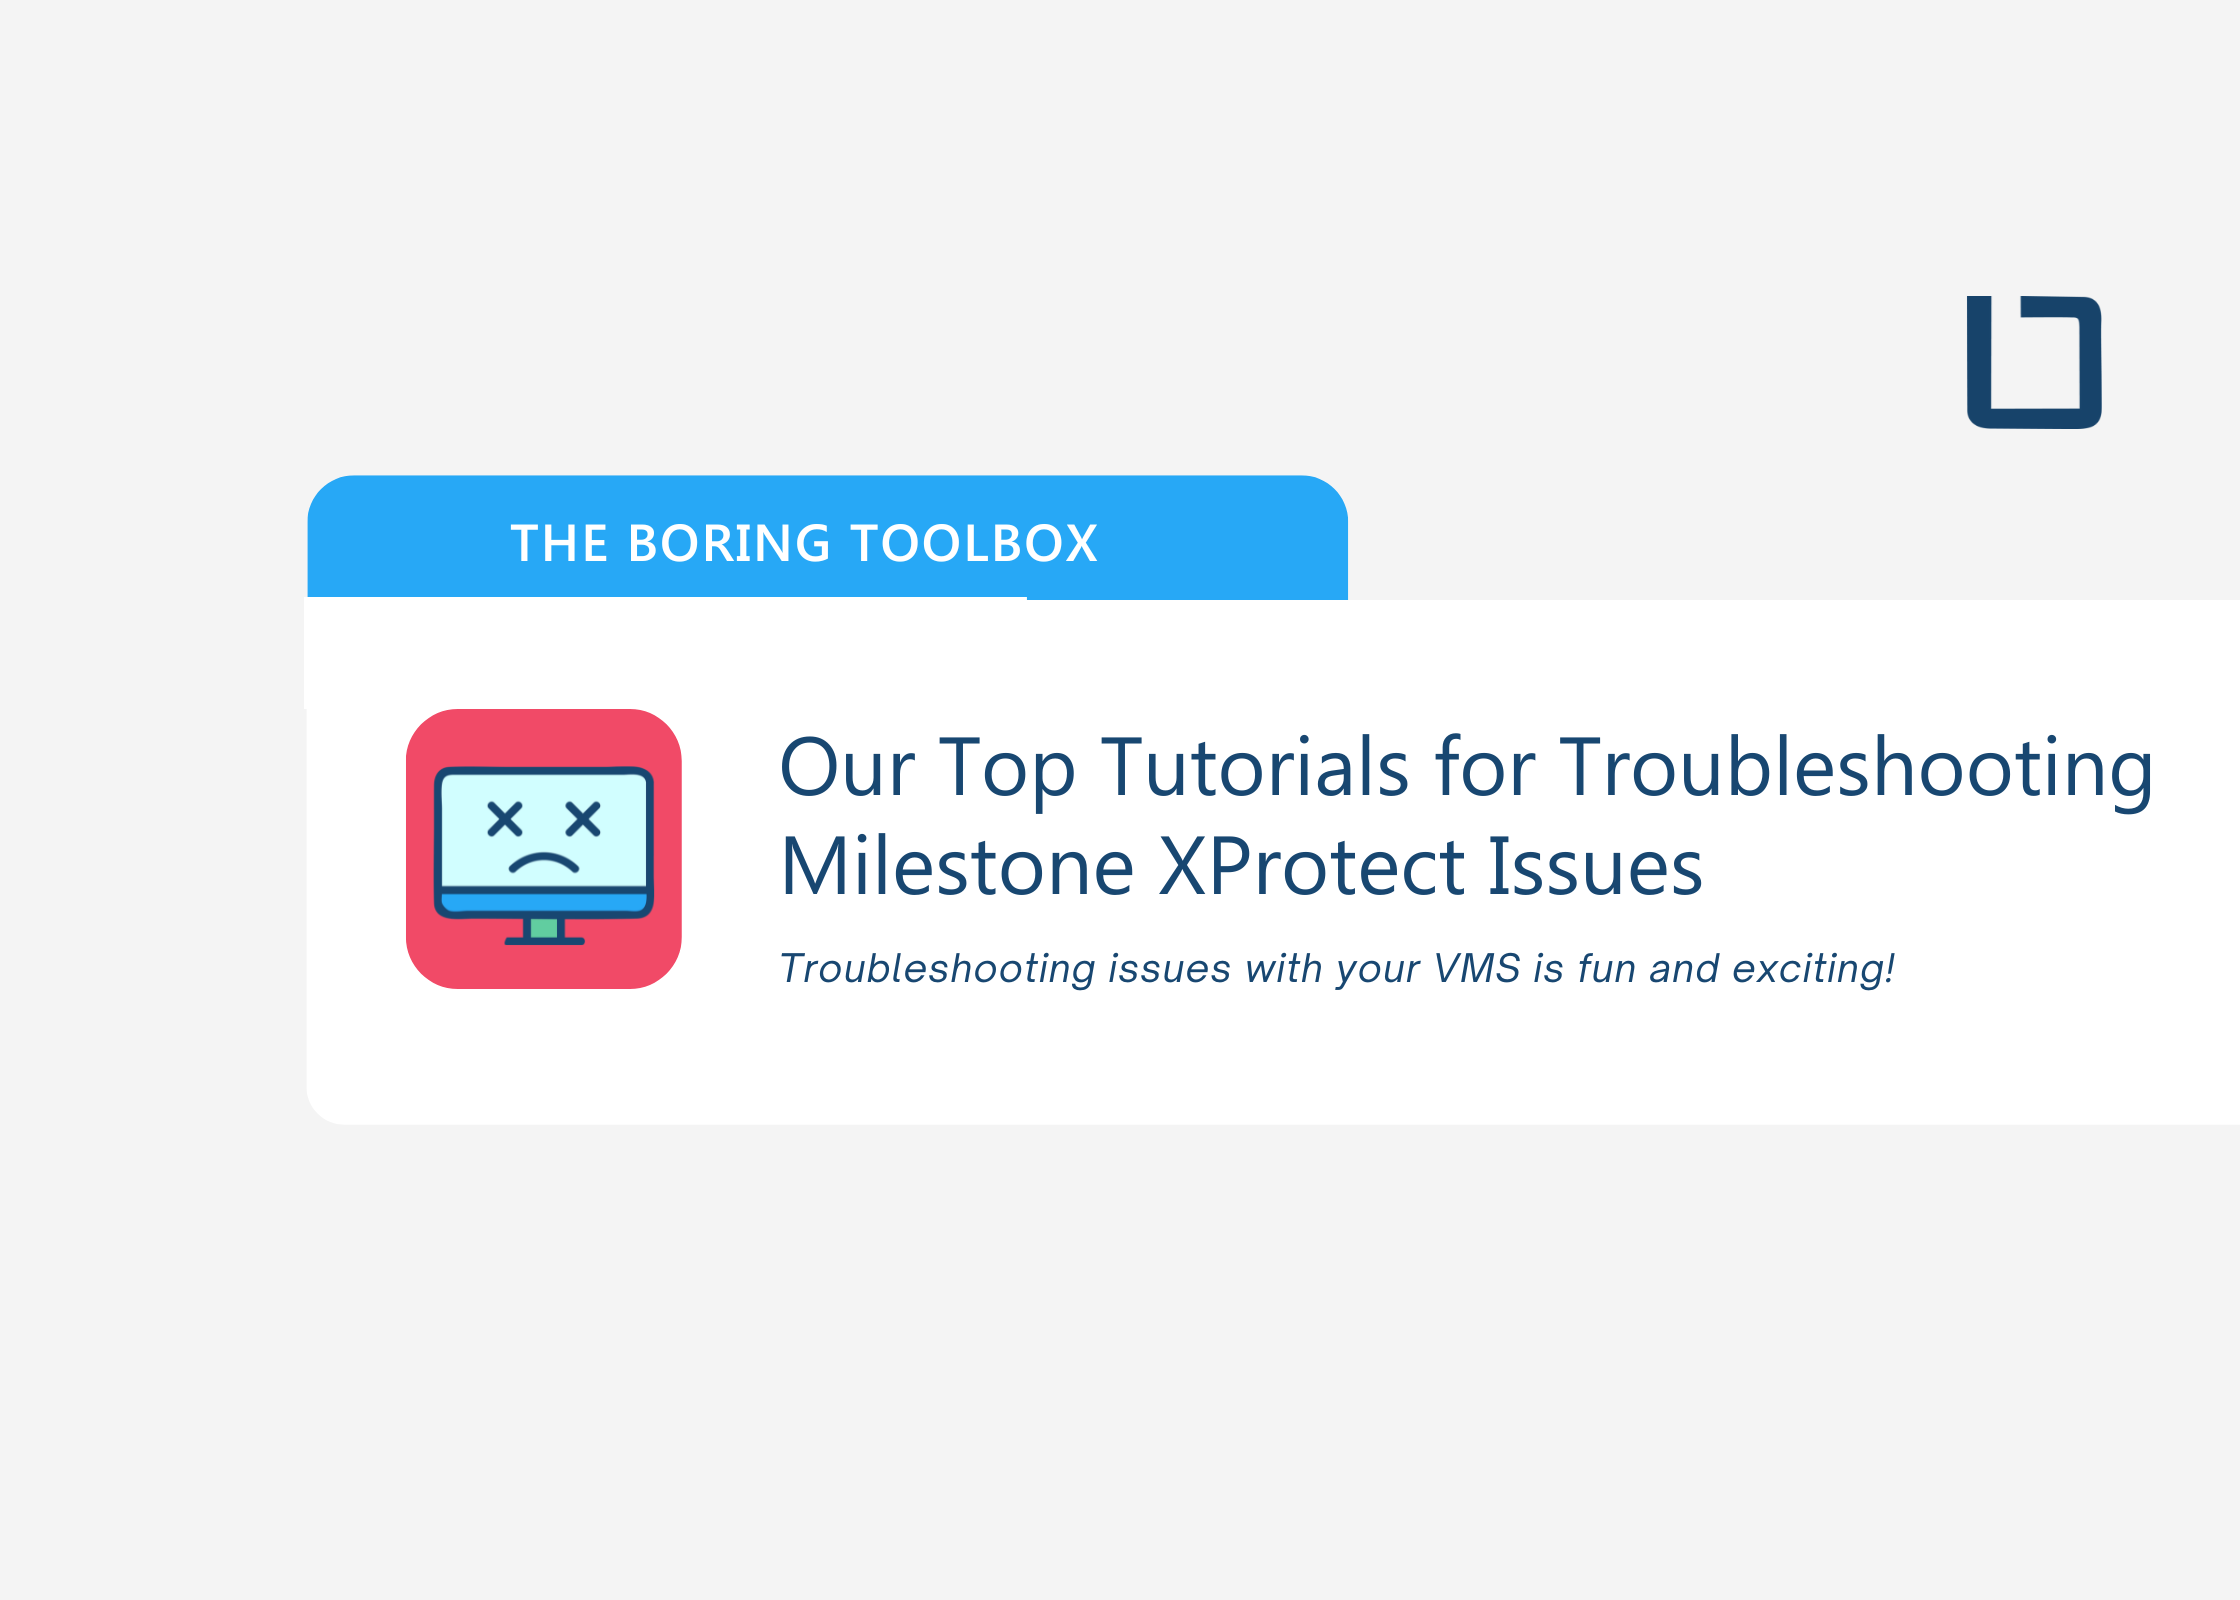 Our Top Tutorials for Troubleshooting Milestone XProtect Issues